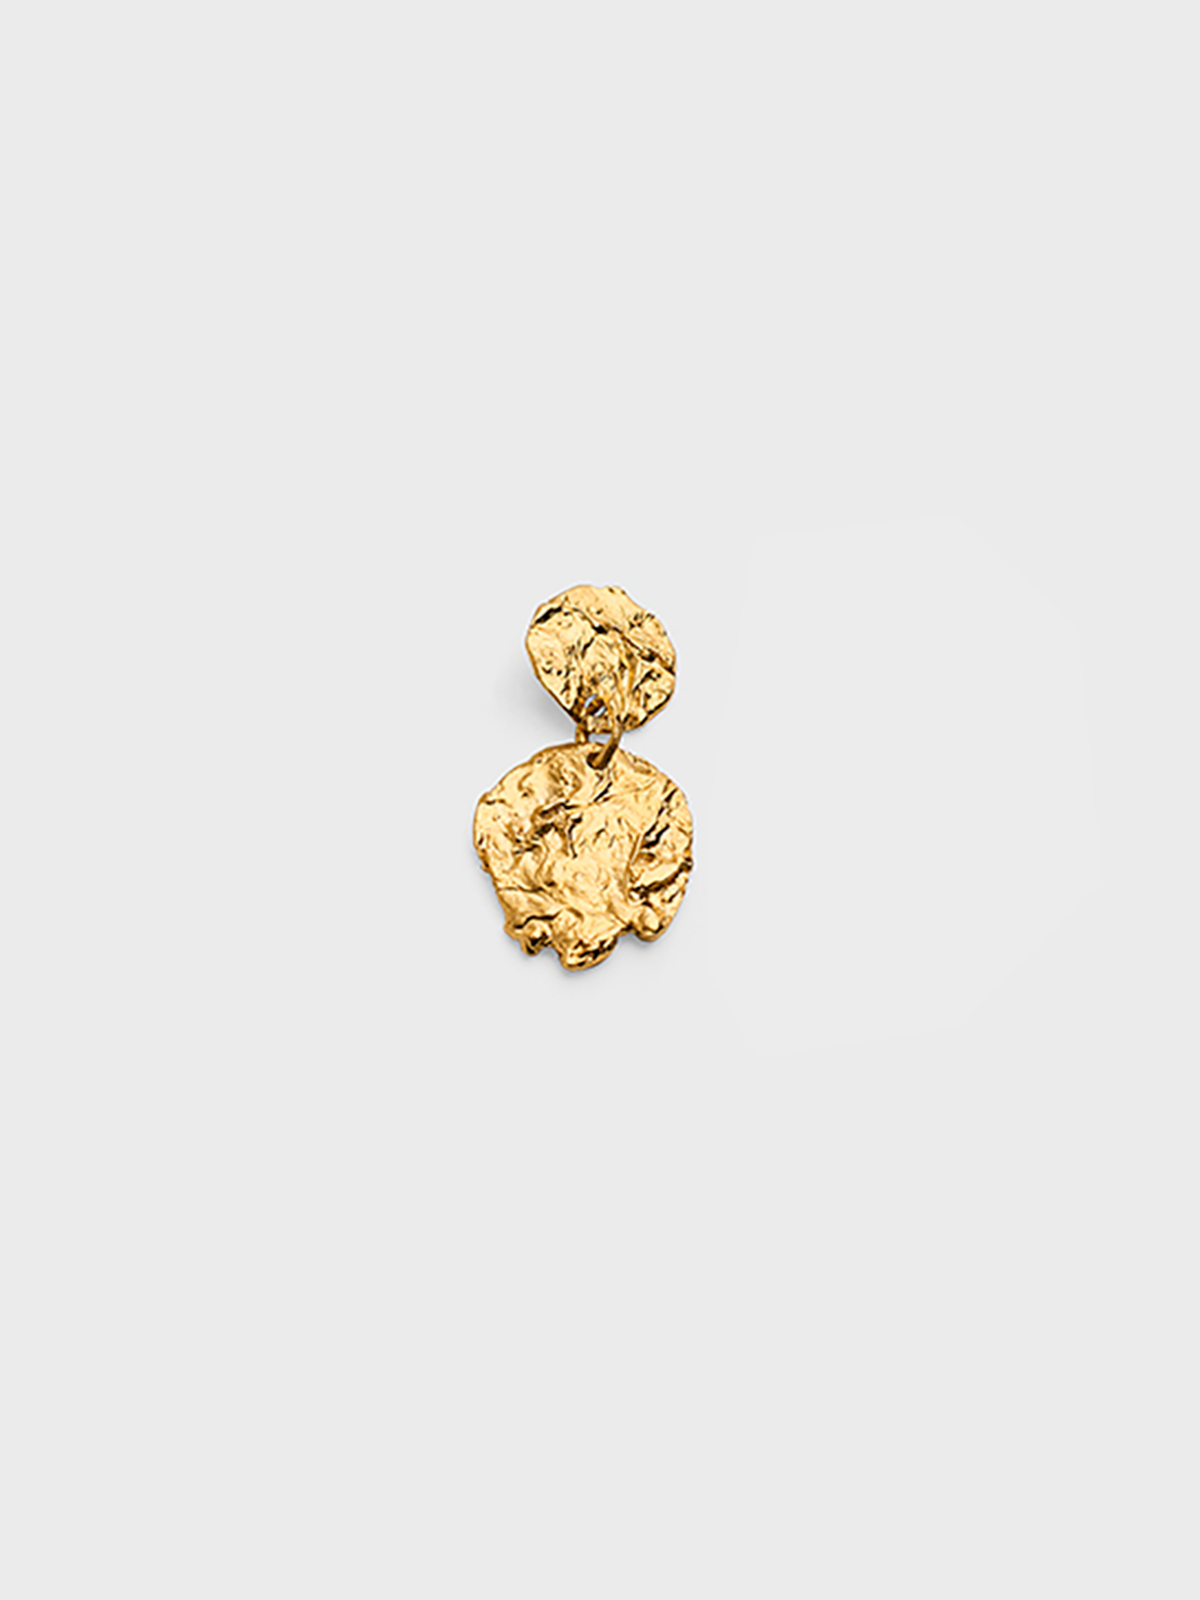 Lea Hoyer - Elna Earring with Gold Plating